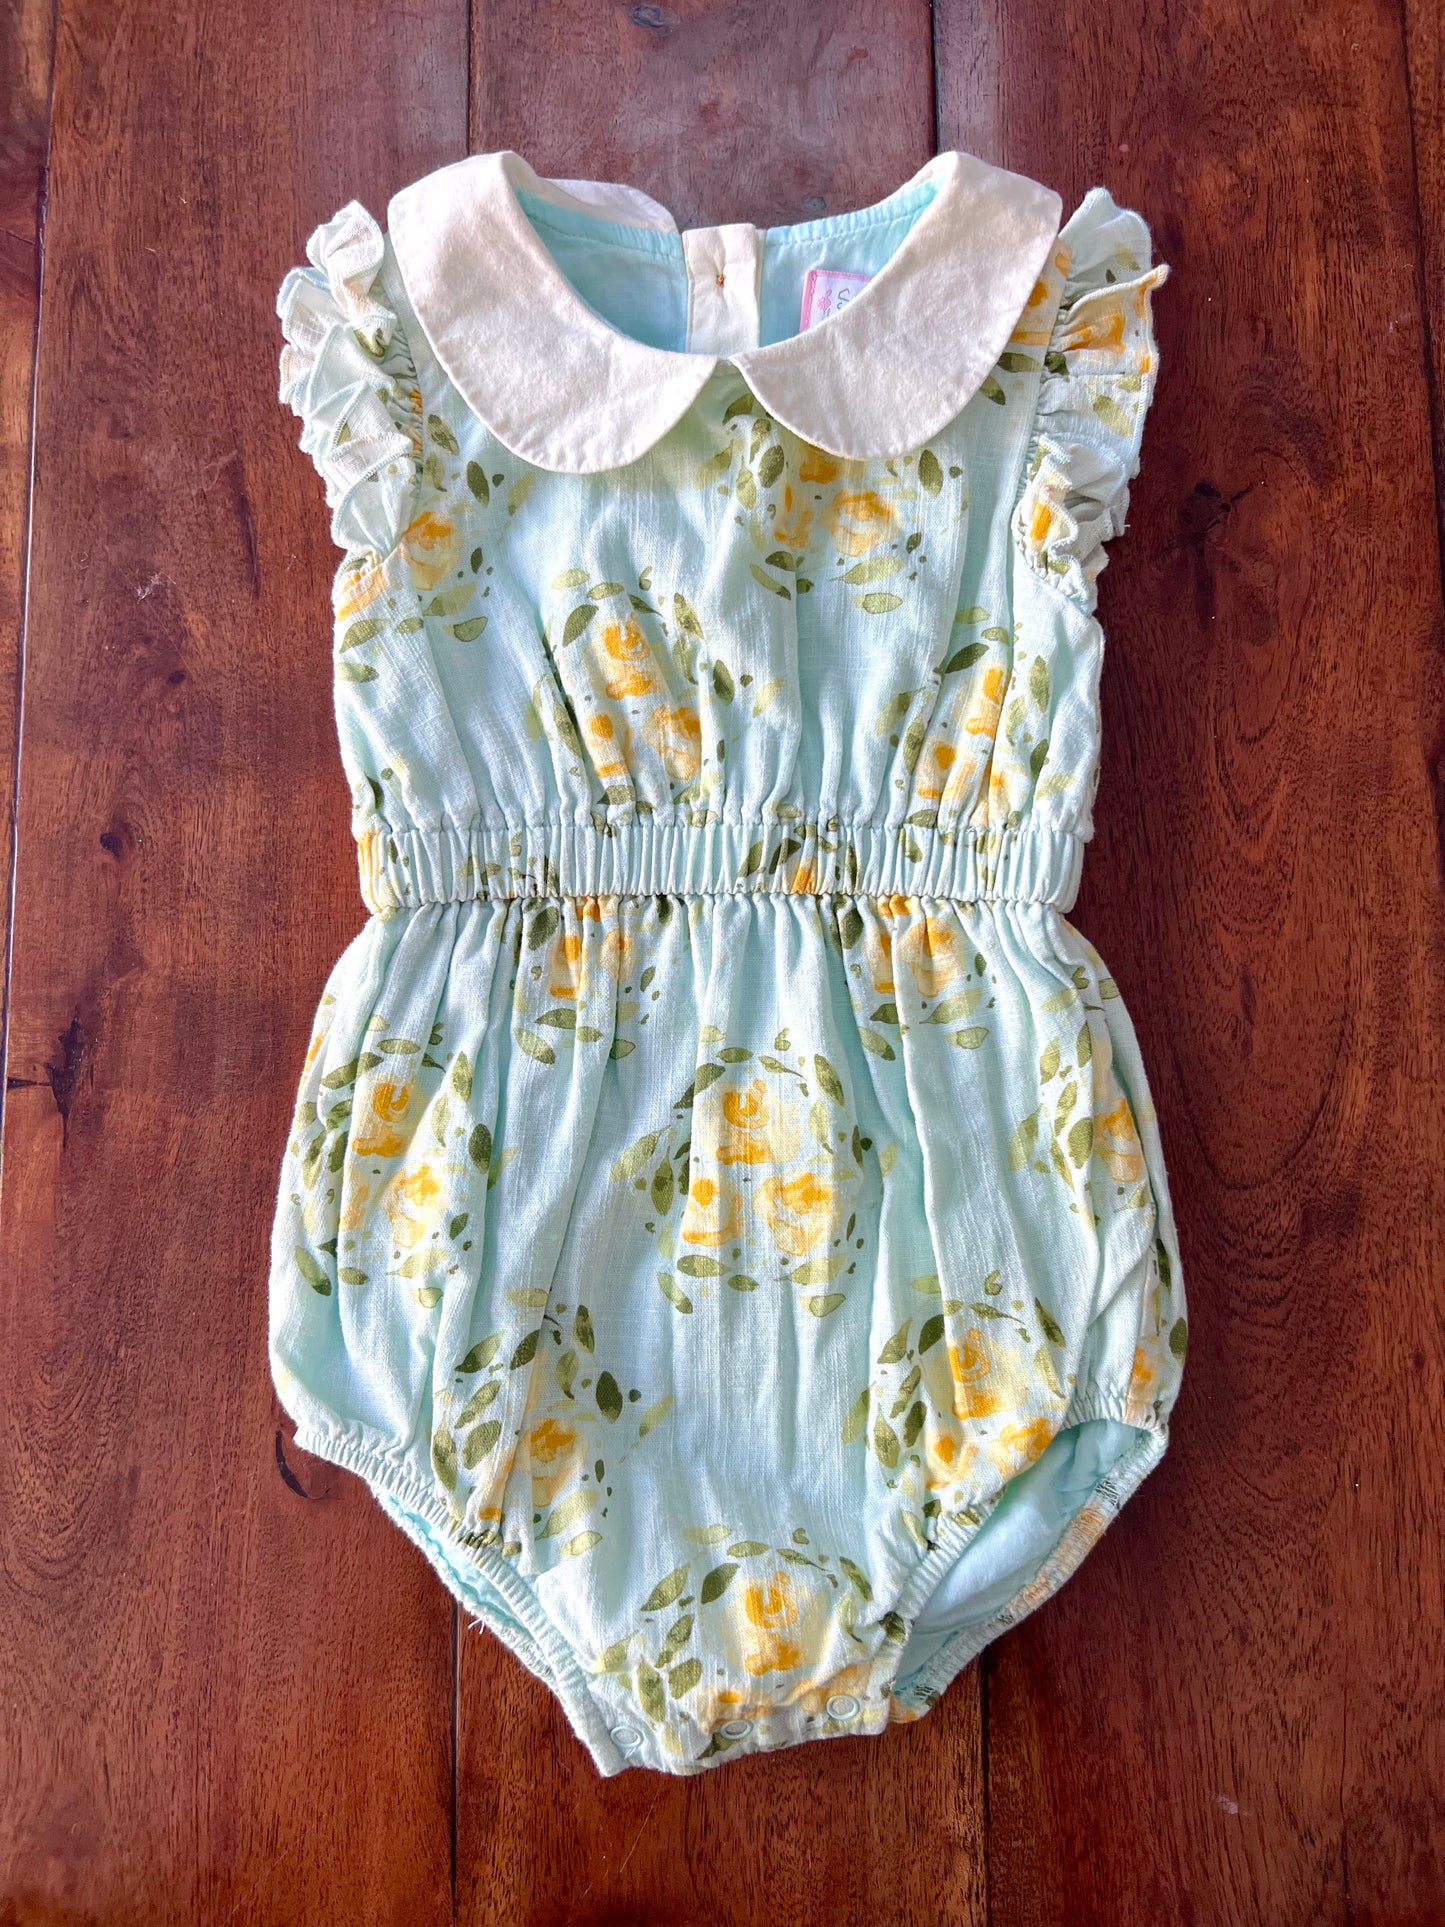 3T Sweethoney bubble romper, light blue with yellow floral and Peter Pan collar. EUC (possibly new without tags).